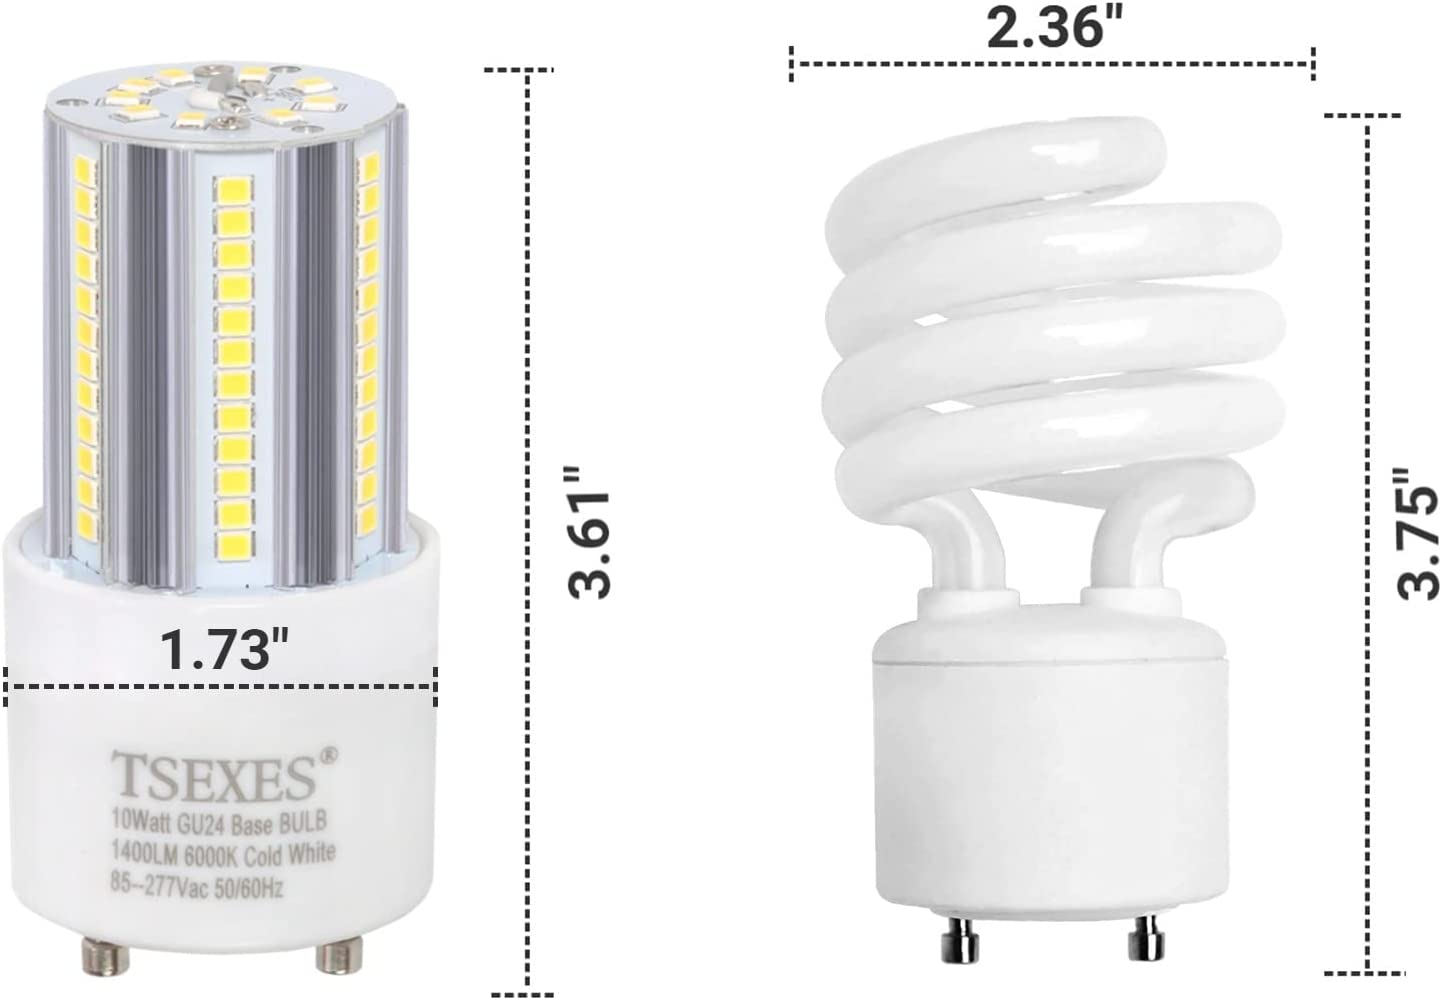 Gu24 Light Bulbs,10W (100W Equivalent), 6000K Cool White, Replacement 2 Prong T2 Spiral CFL Bulb/Compact Fluorescent ,2 Pack